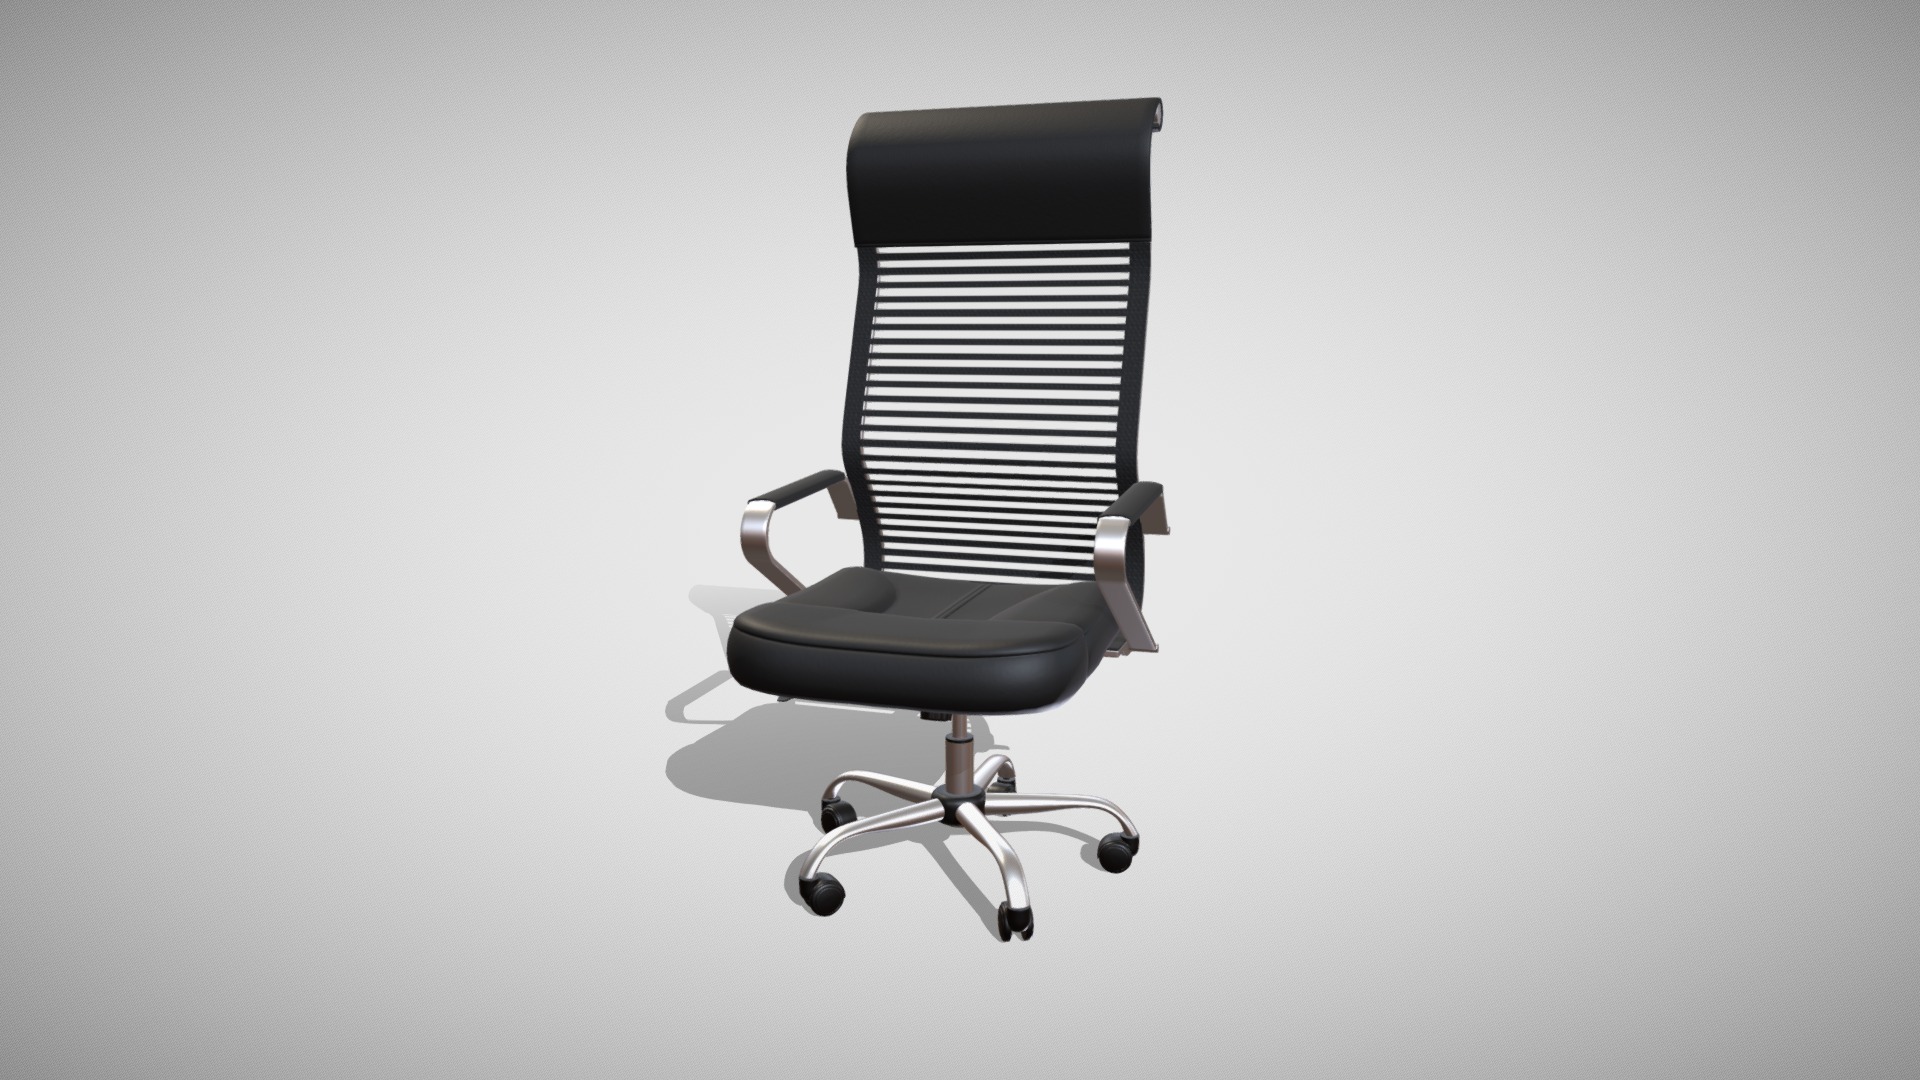 3D model Office chair - This is a 3D model of the Office chair. The 3D model is about a black office chair.